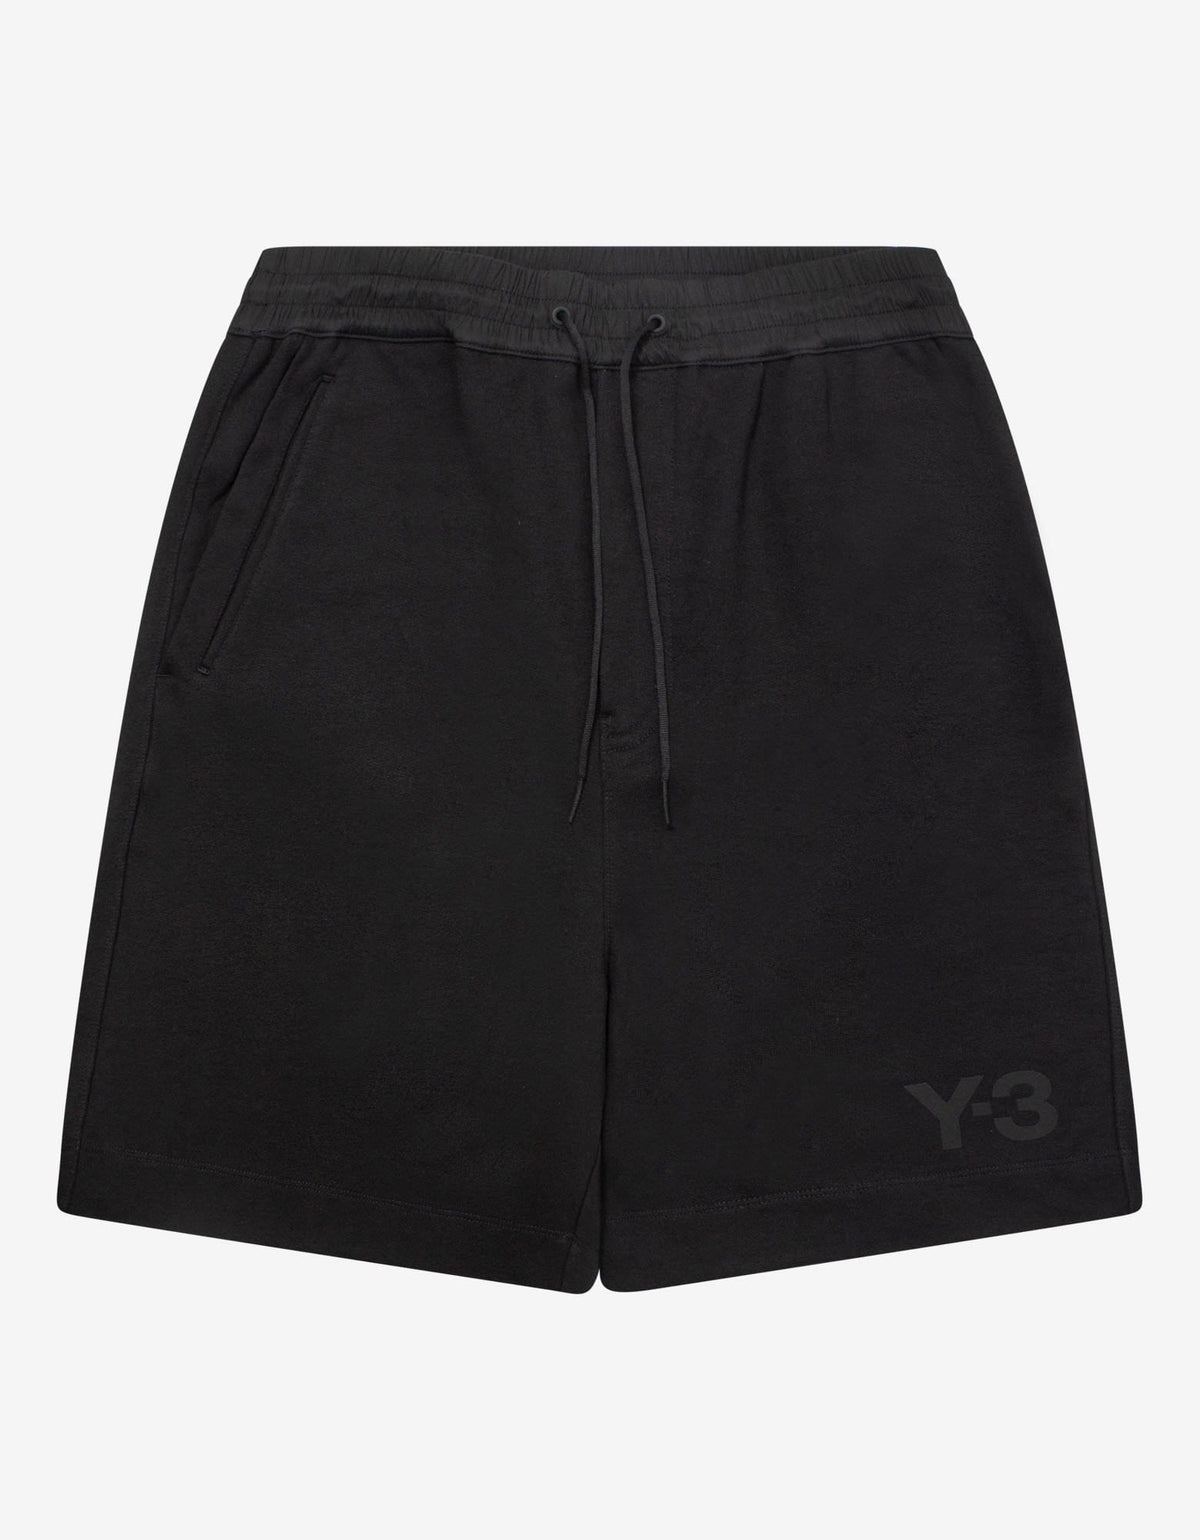 Y-3 Black Classic Terry Shorts